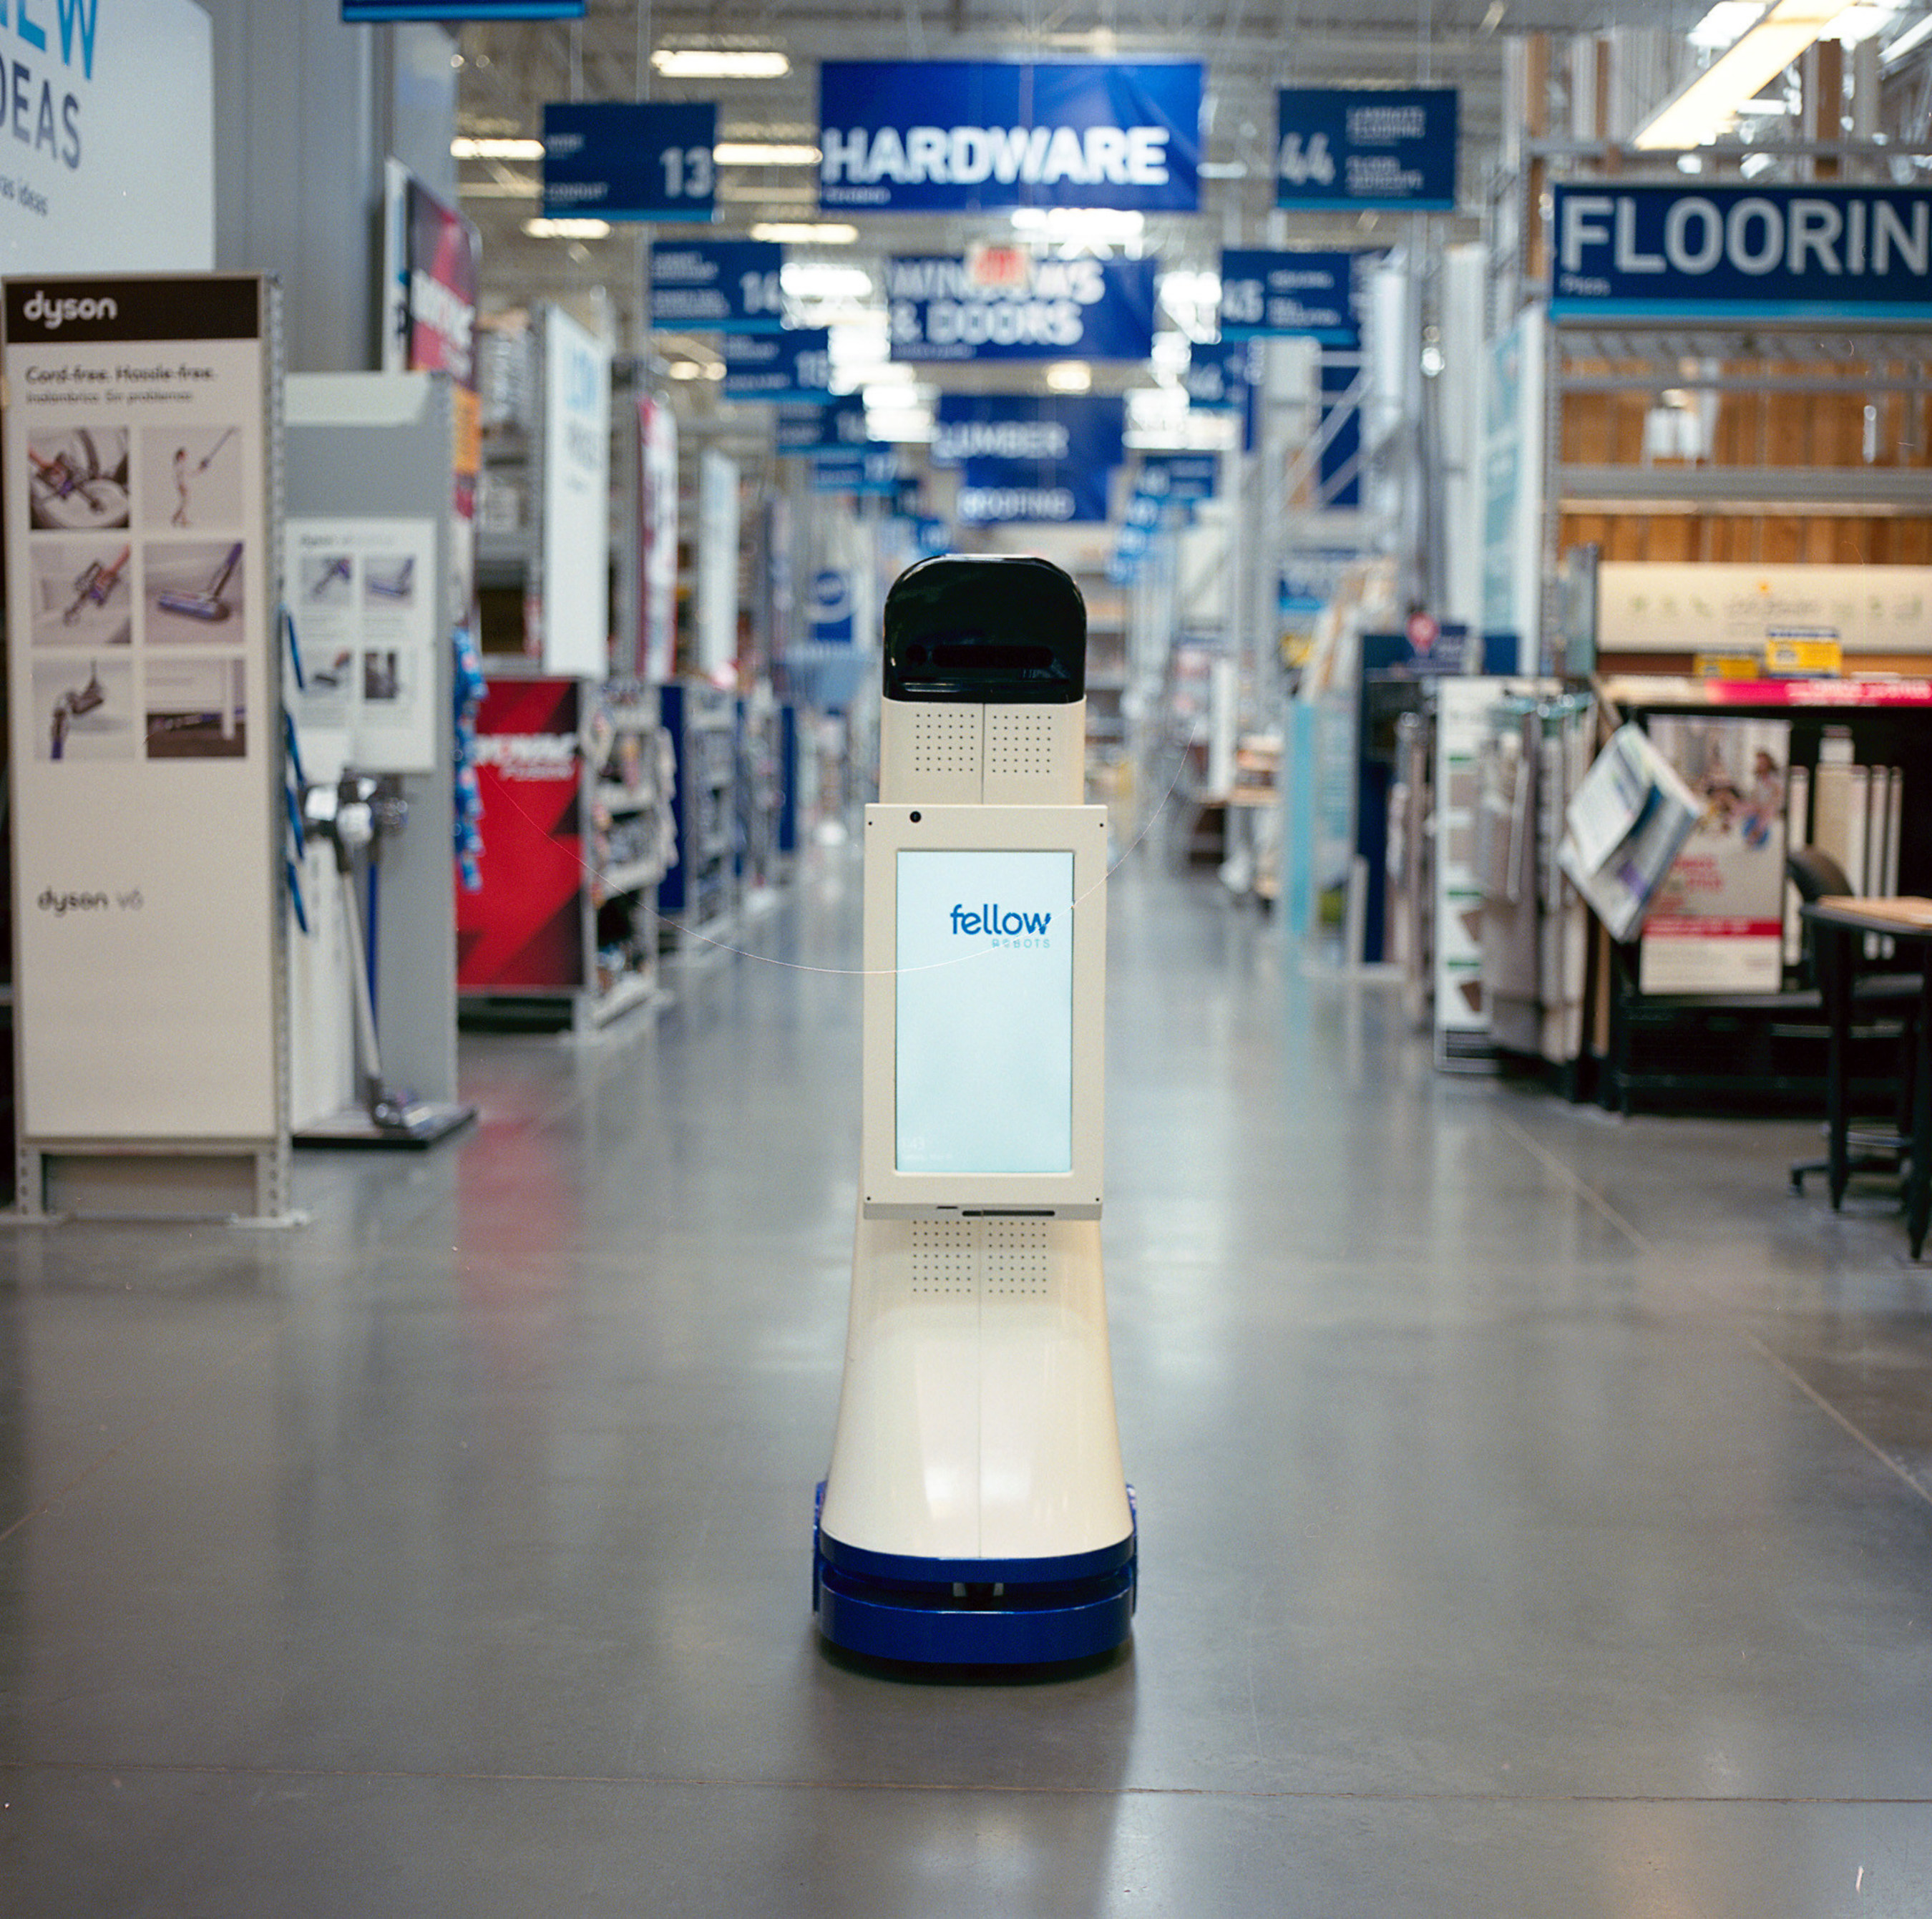 This fall, Lowe's will introduce LoweBot, a NAVii(TM) autonomous retail service robot by Fellow Robots, in 11 Lowe's stores throughout the San Francisco Bay area.